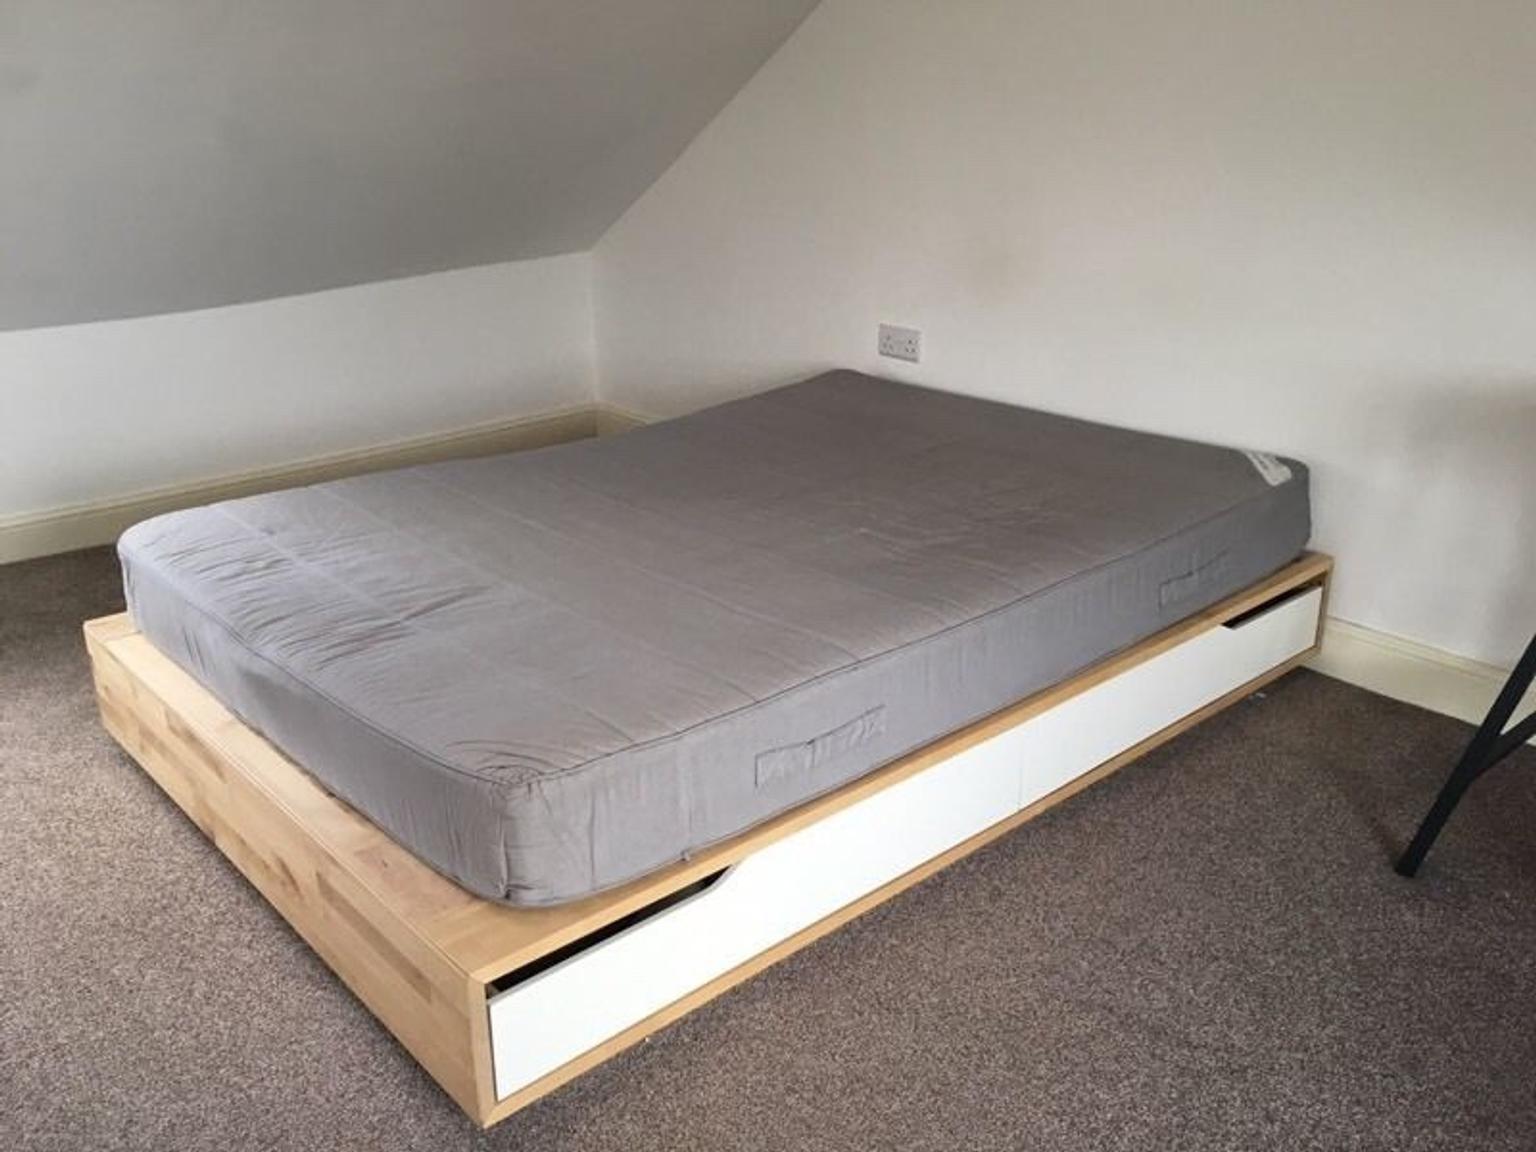 Ikea King Size Mandal Bed Frame With Storage In N5 Islington For 145 00 For Sale Shpock,Baggage Allowance United Airlines Basic Economy